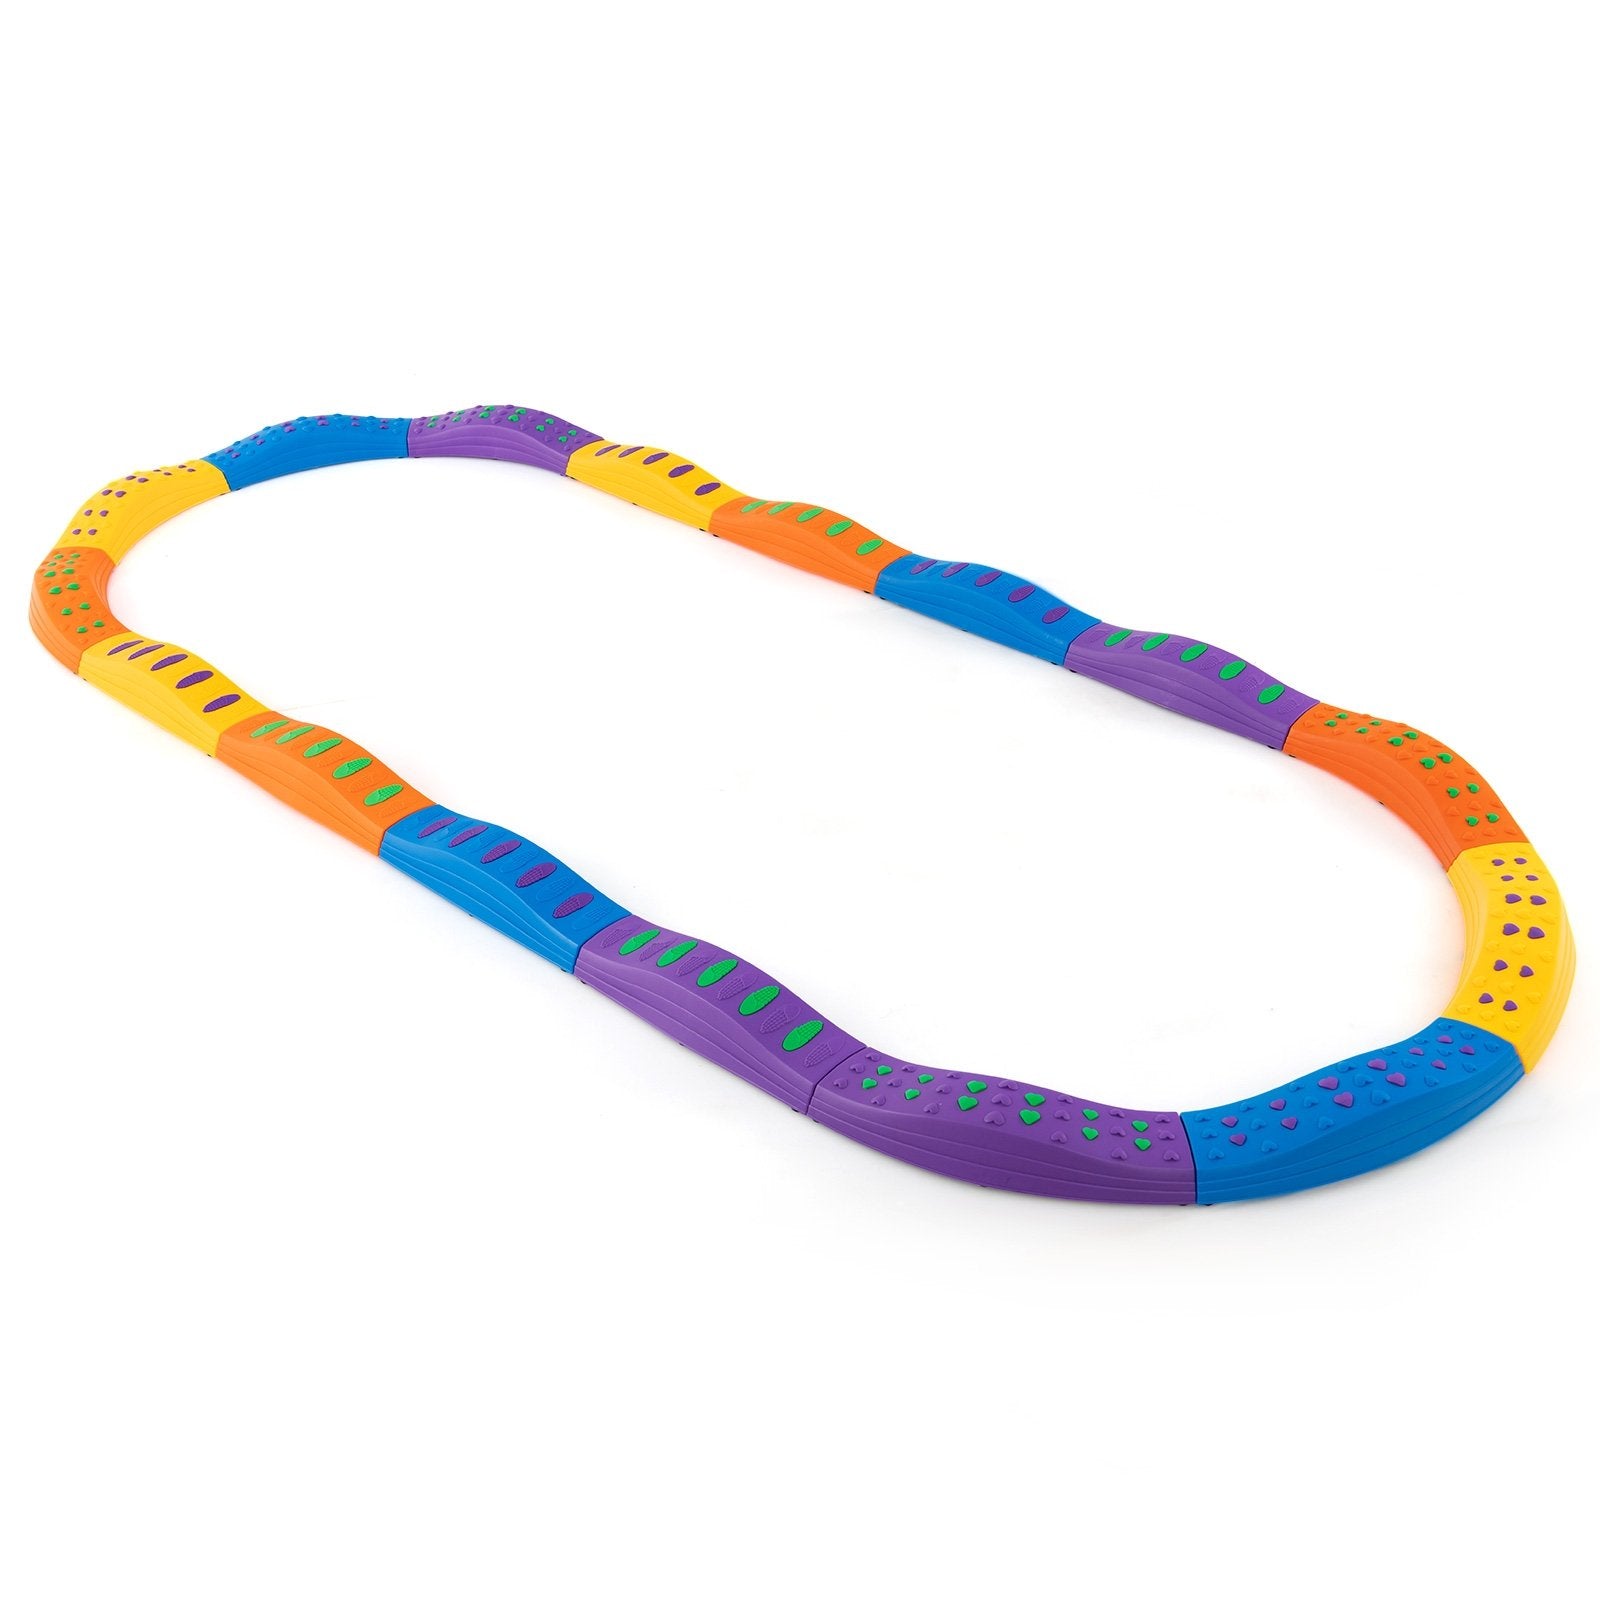 Colorful Kids Wavy Balance Beam with Textured Surface and Non-slip Foot Pads, Blue & Orange - Gallery Canada